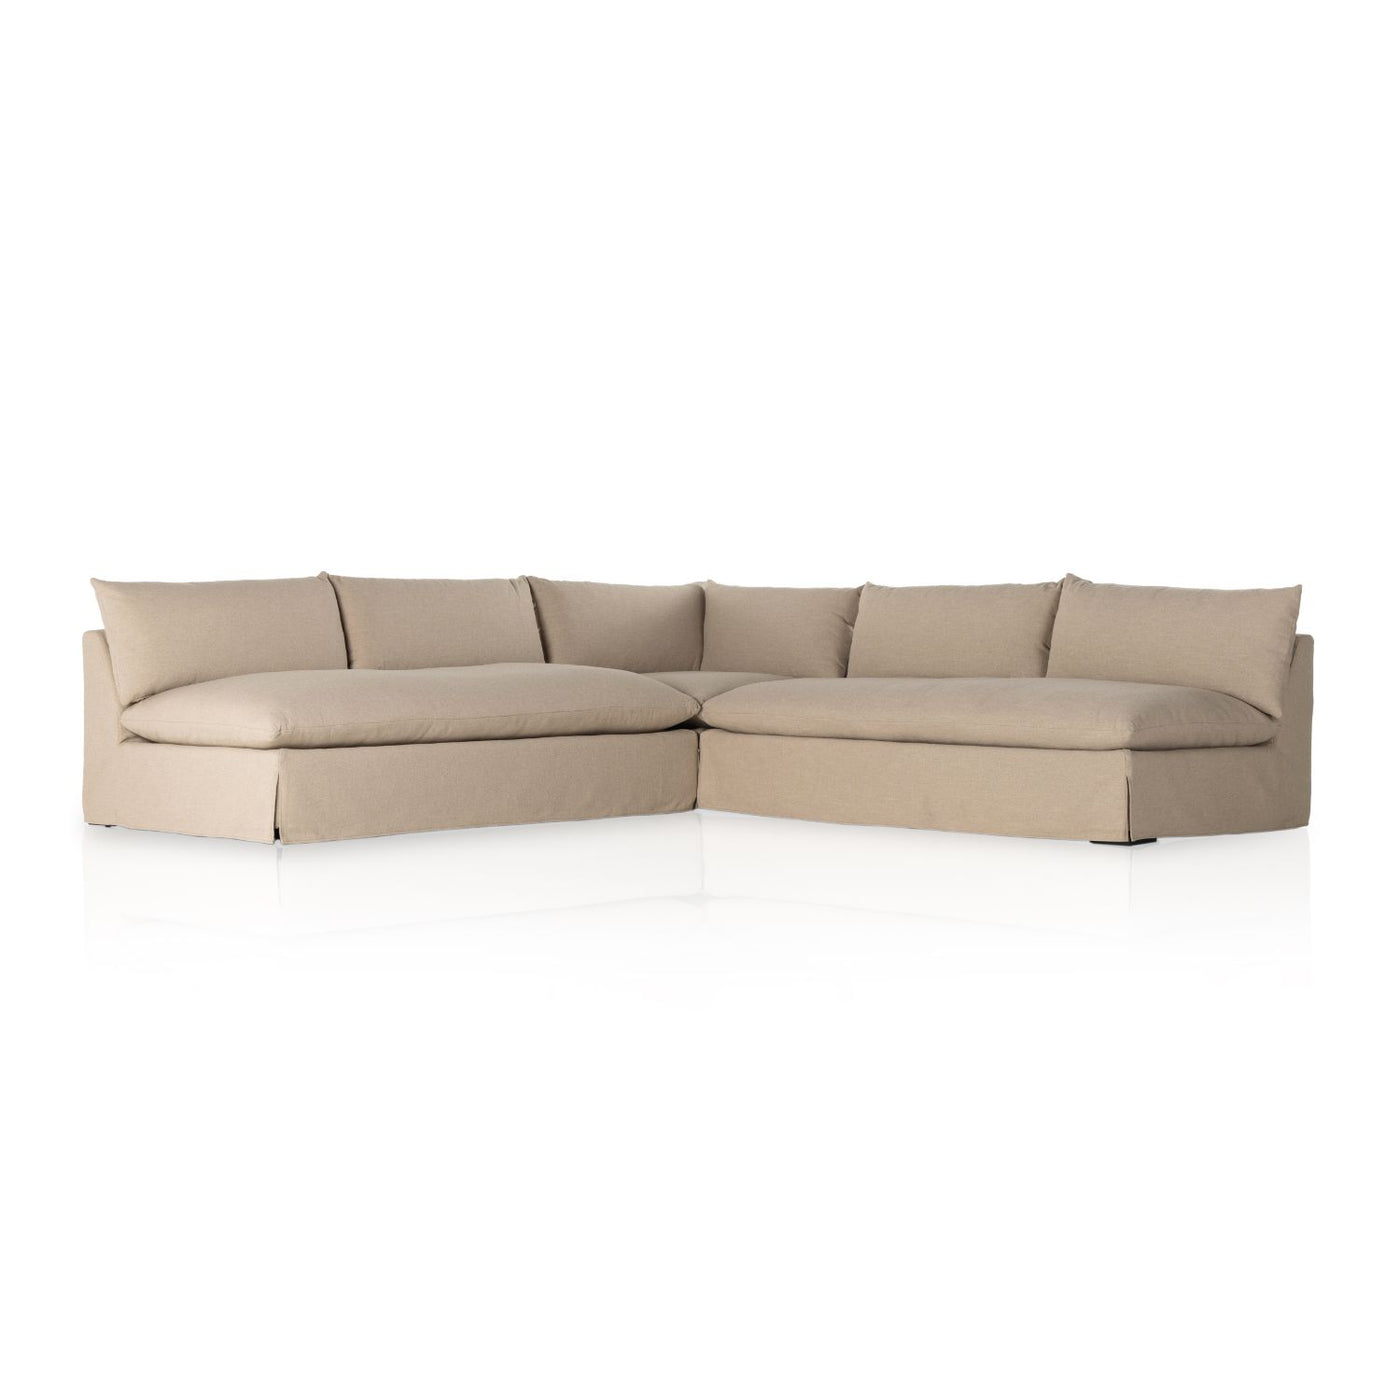 Grant Slipcover 3 Pc Sectional